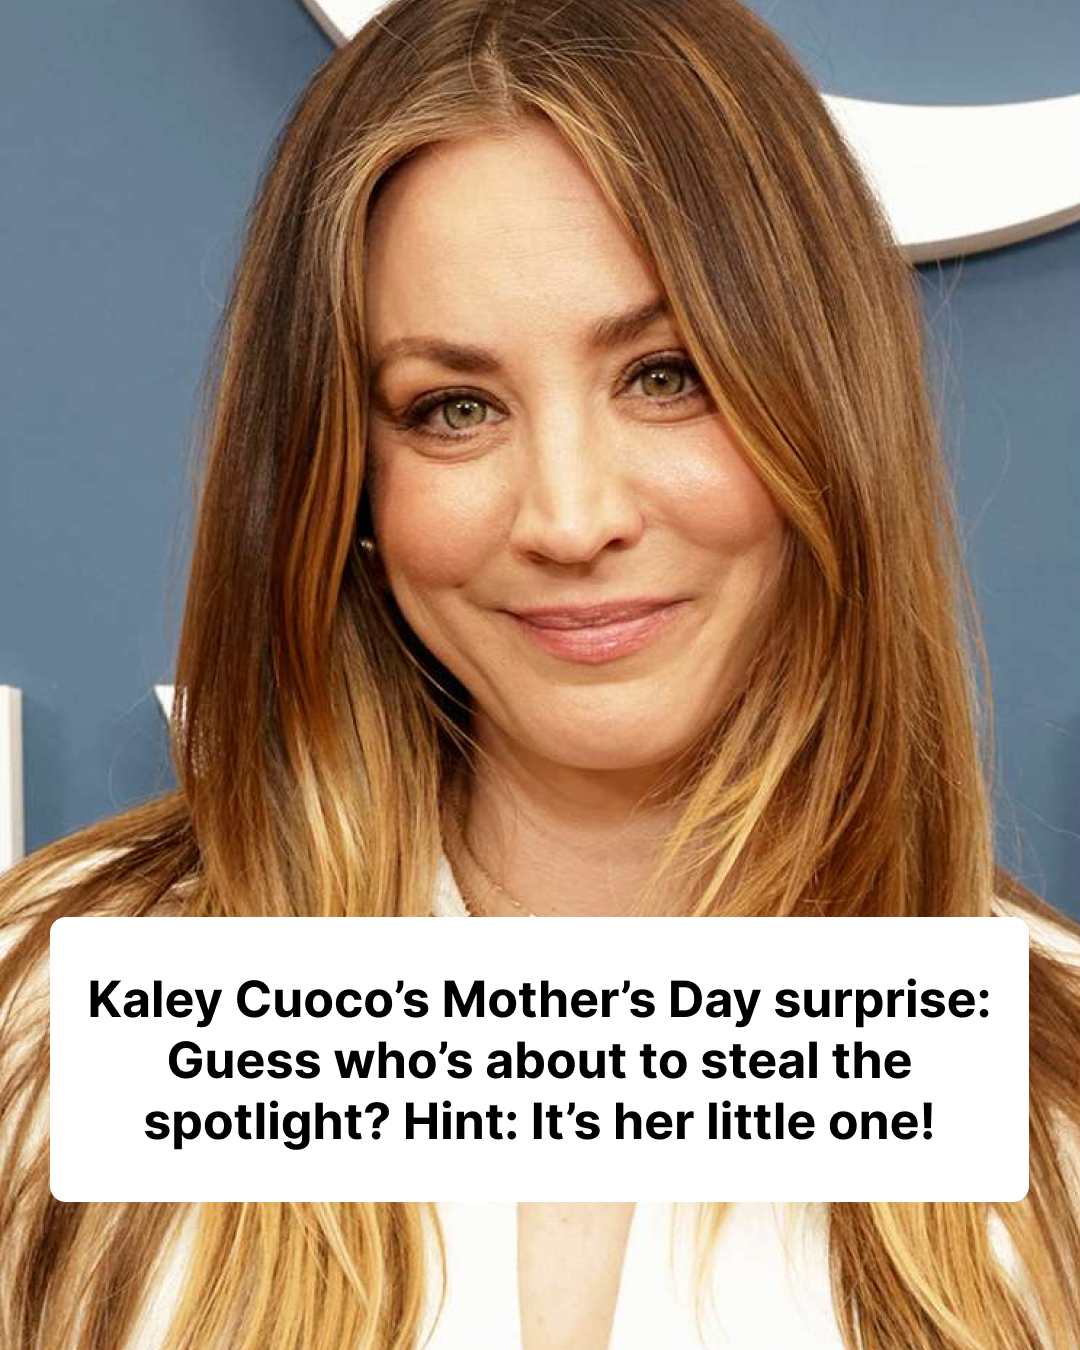 Kaley Cuoco Shares Adorable Photo of Daughter Matilda Ahead of Mother’s Day Reunion: ‘See You Soon’